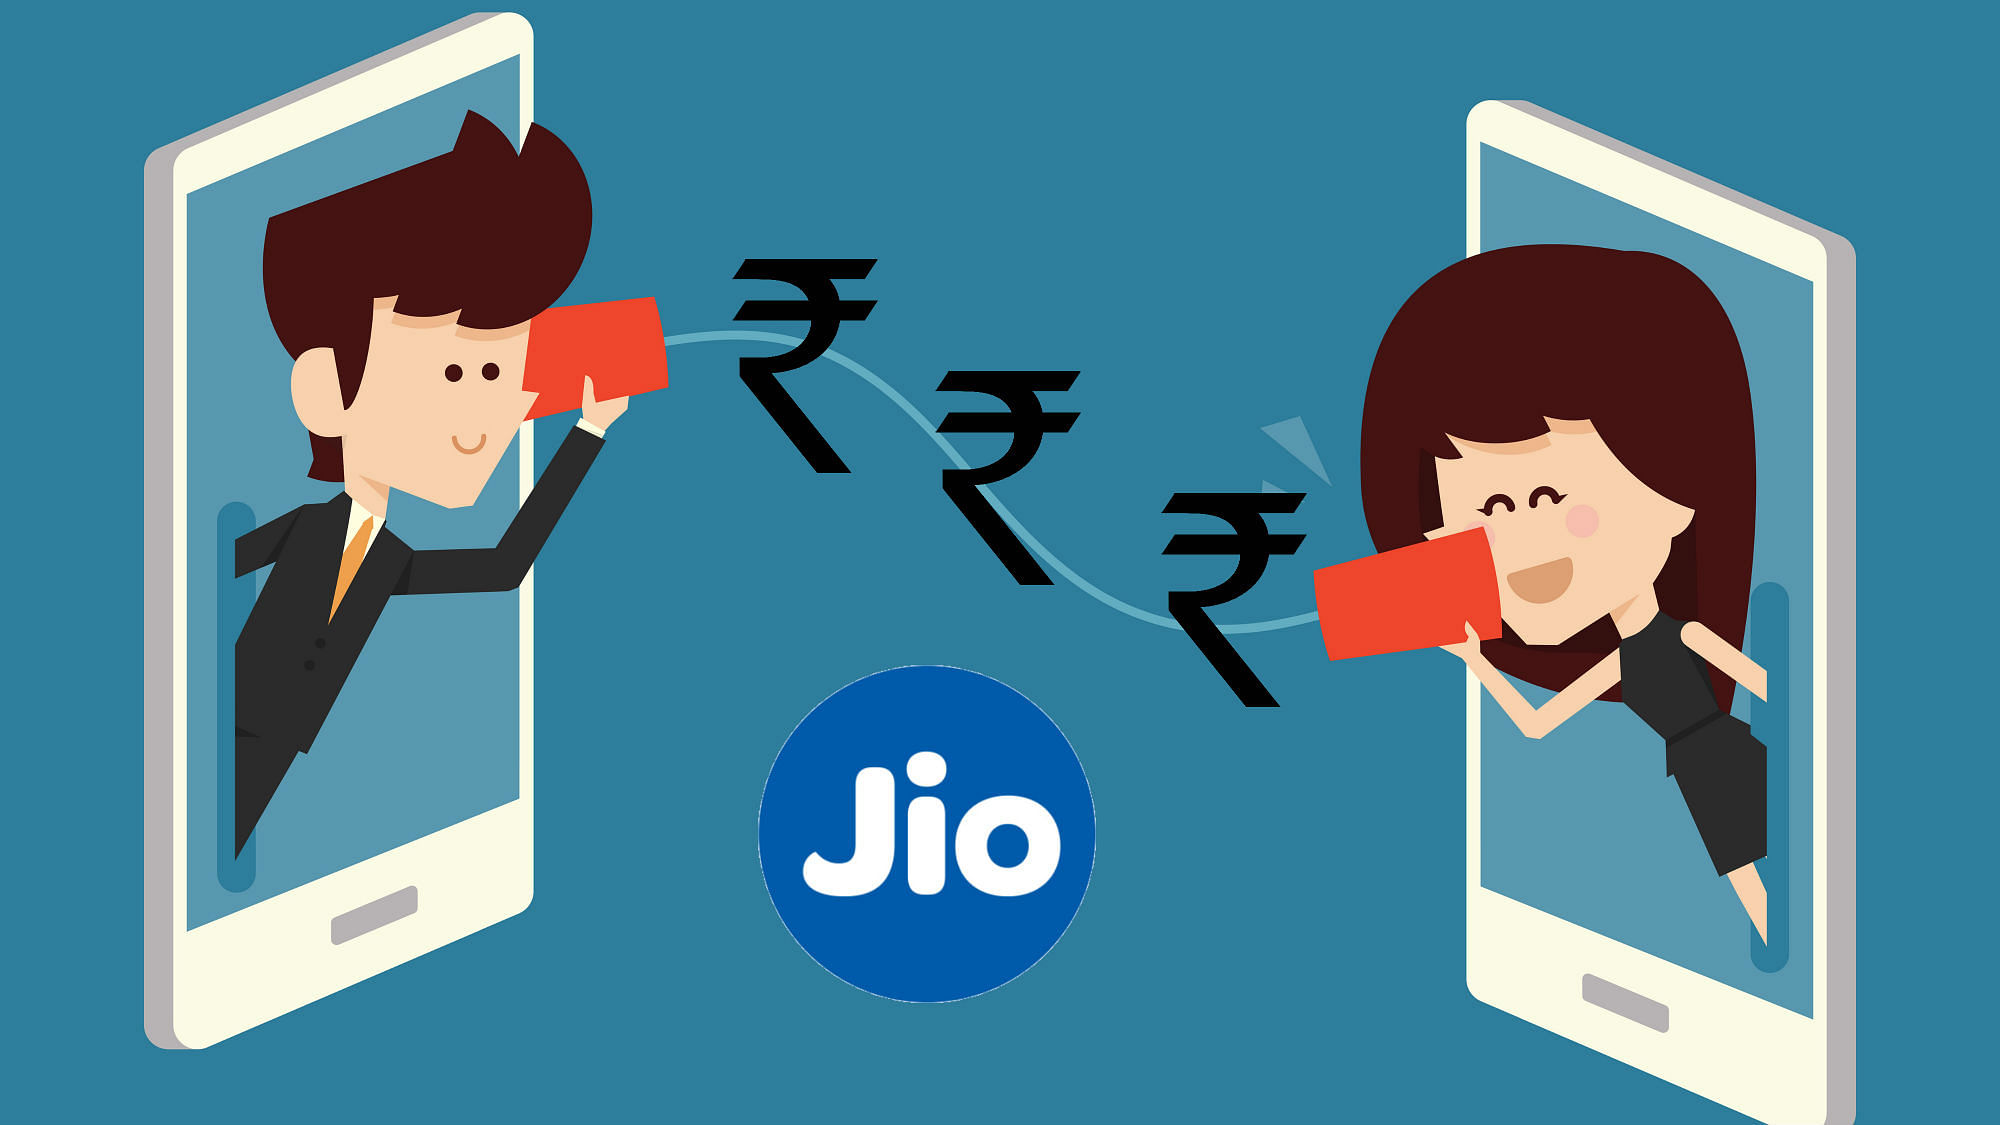 Jio 4G users can avail 4G data usage up to 750GB in a year. (Photo: <b>The Quint</b>)